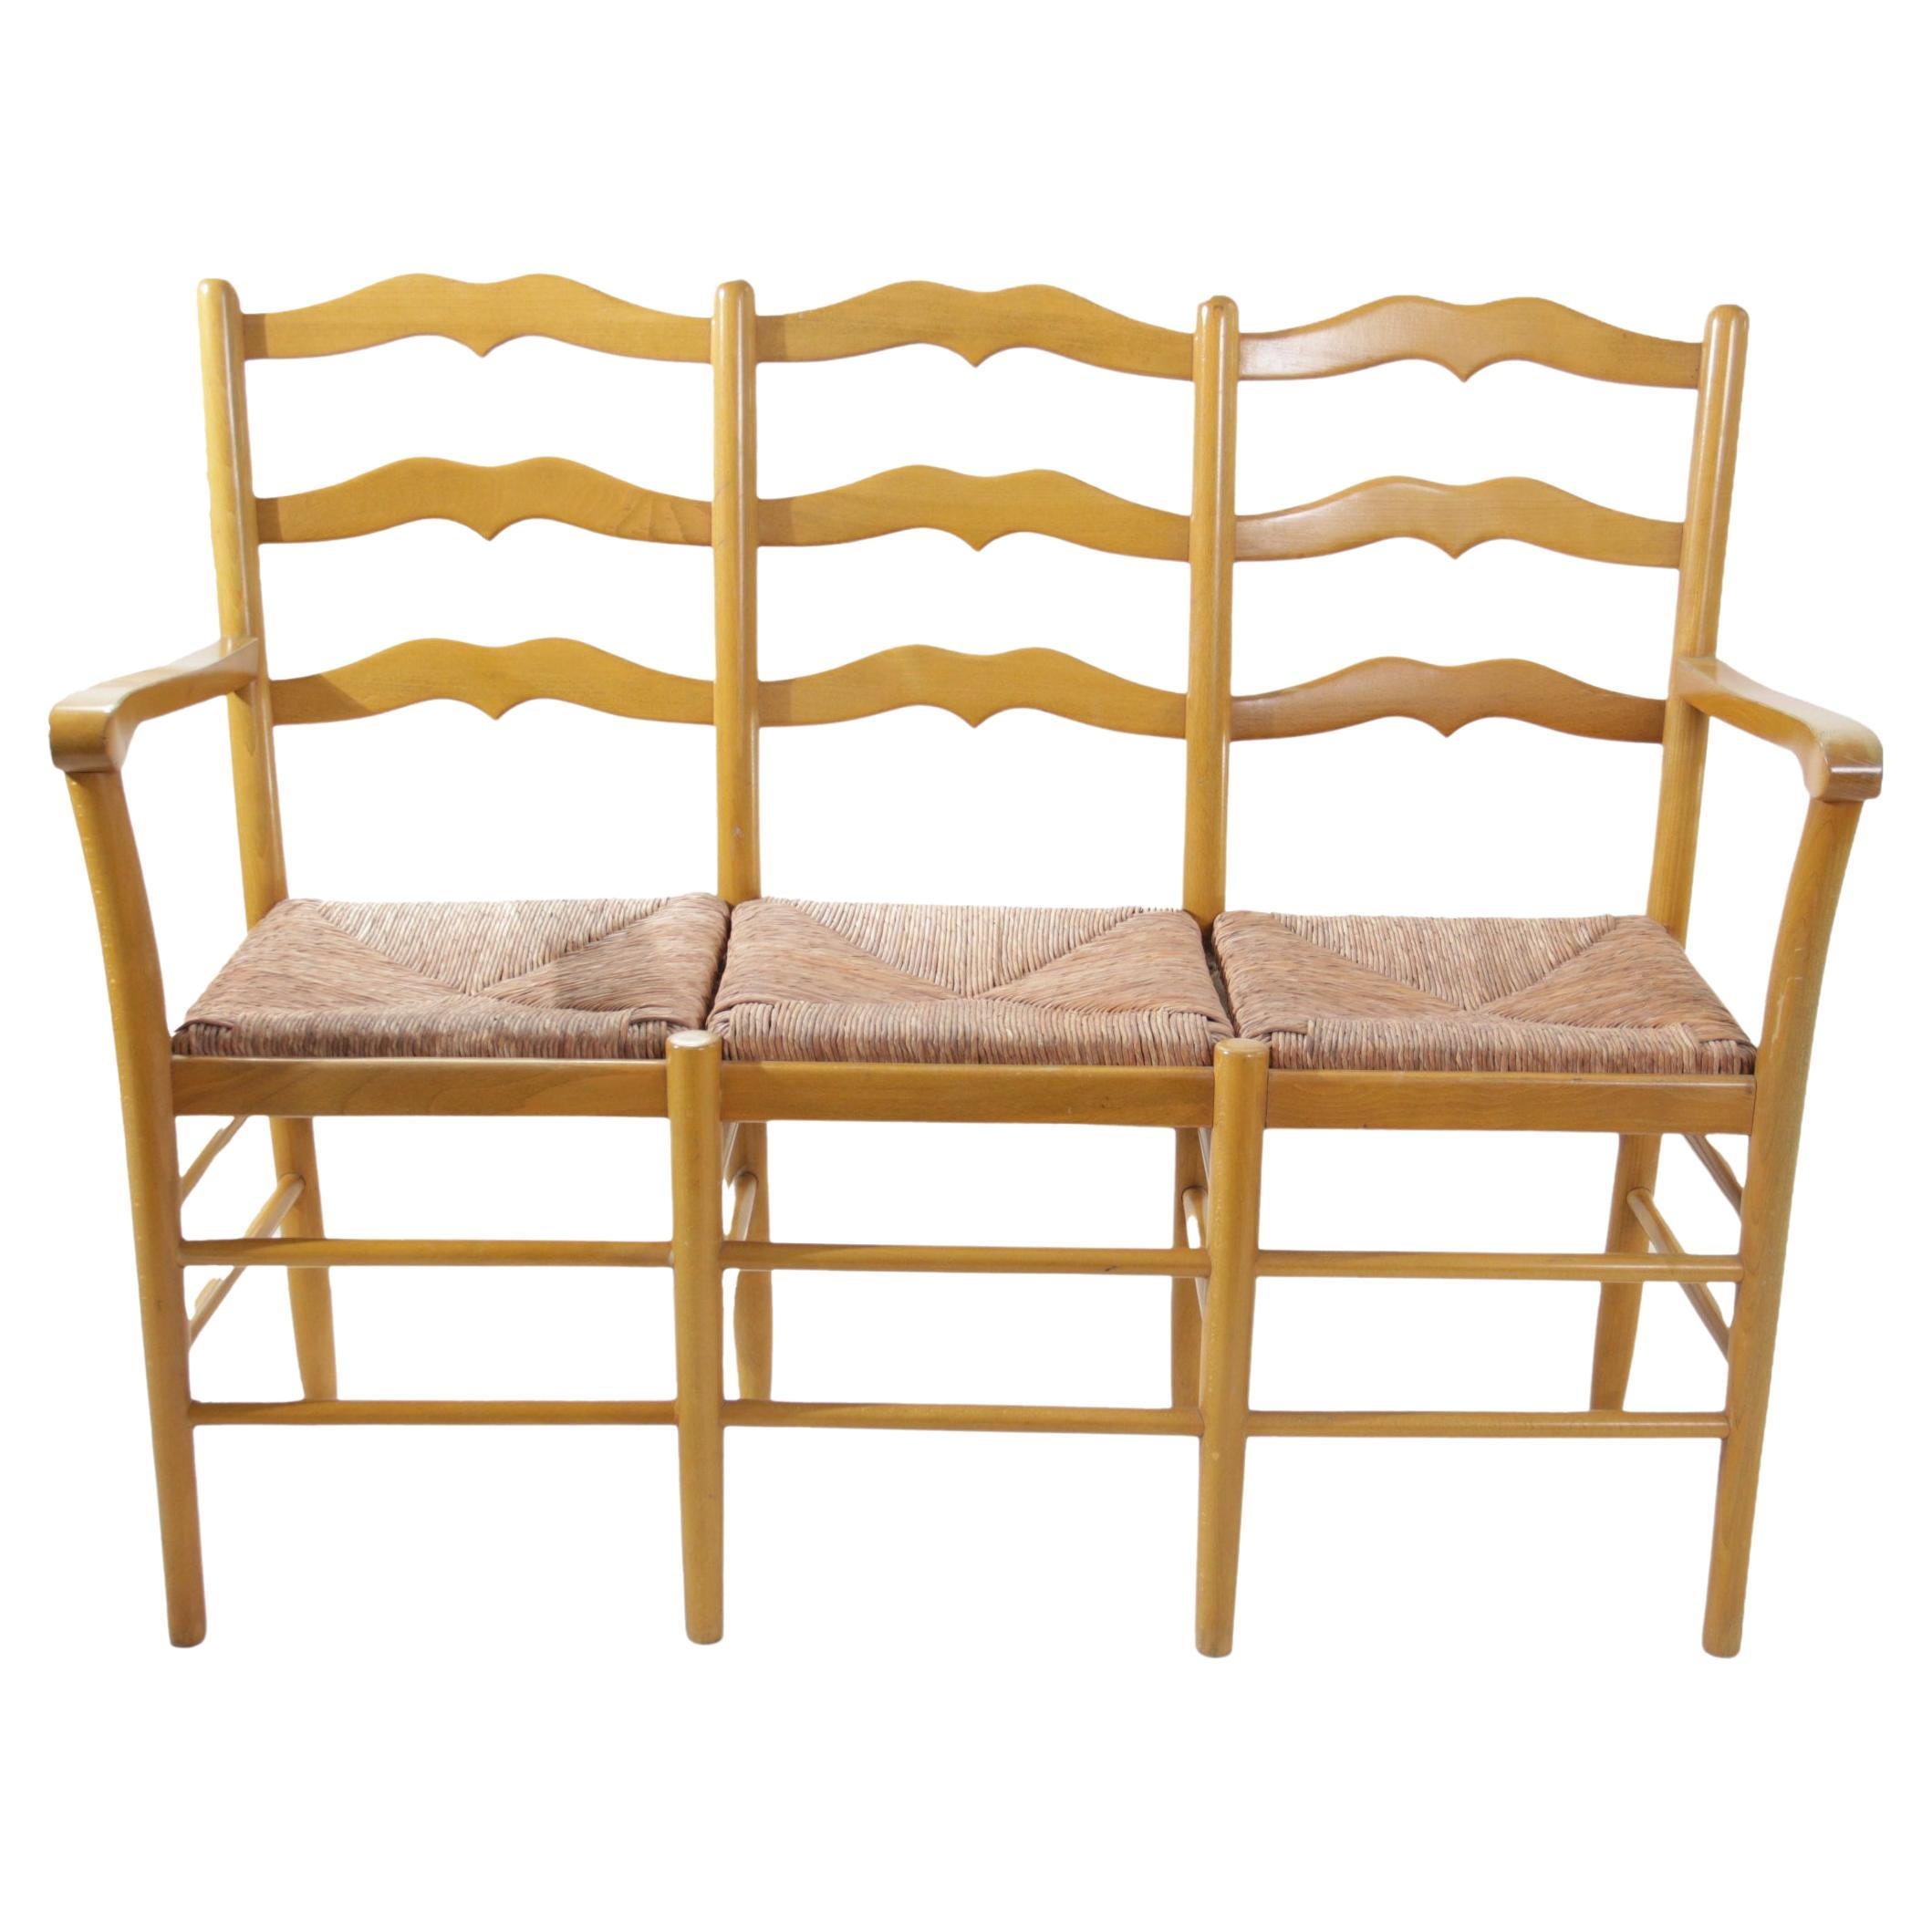 Elegant Simplicity: A Mid-Century Beechwood Three-Seater Bench  Handwoven Rush For Sale